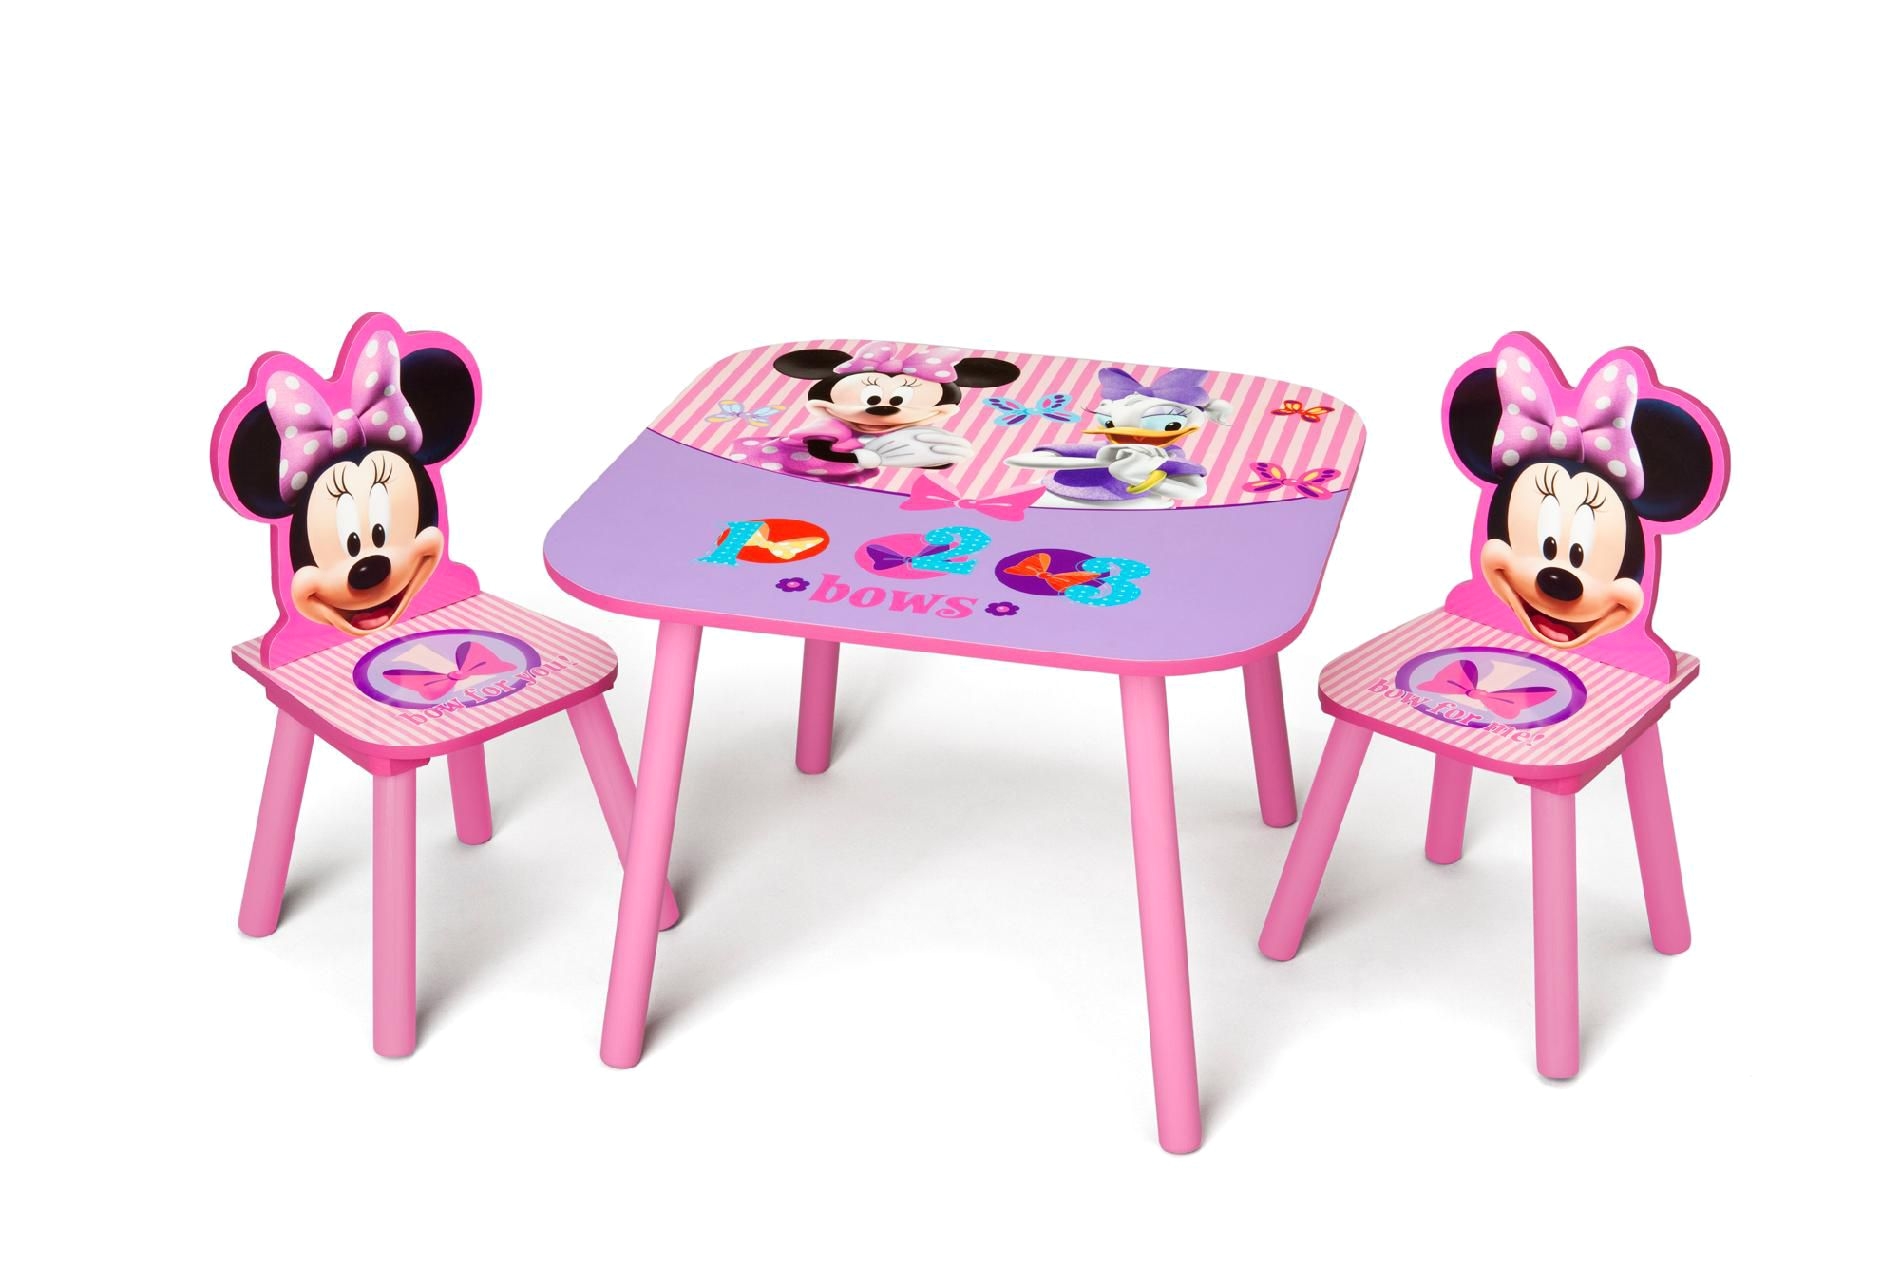 Minnie Mouse Table and Chairs B&amp;m Delta Children Minnie Mouse Table Chair Set Baby